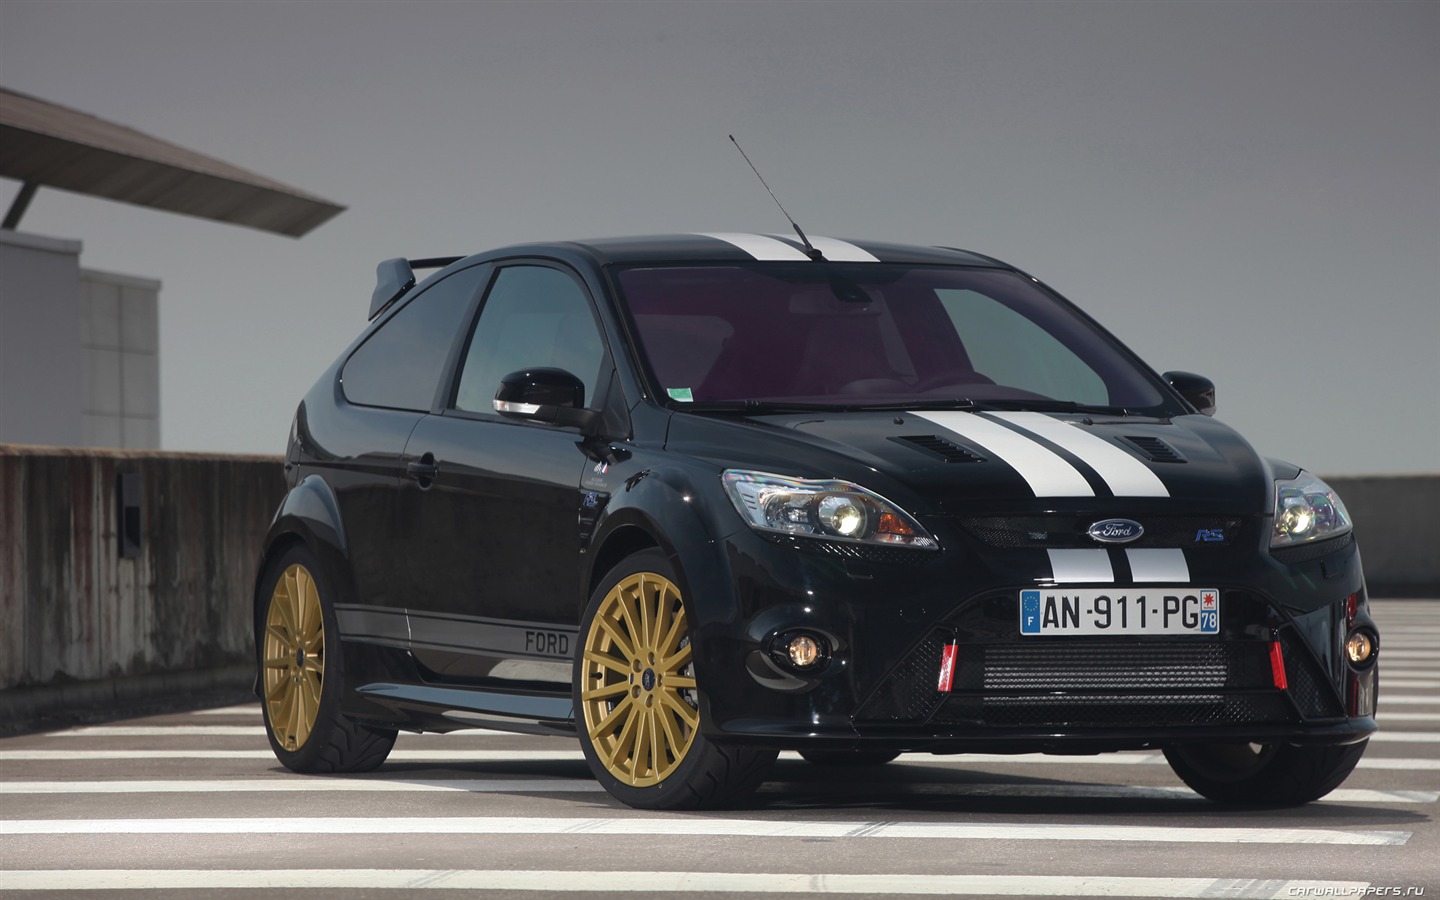 Ford Focus RS Le Mans Classic - 2010 福特 #2 - 1440x900